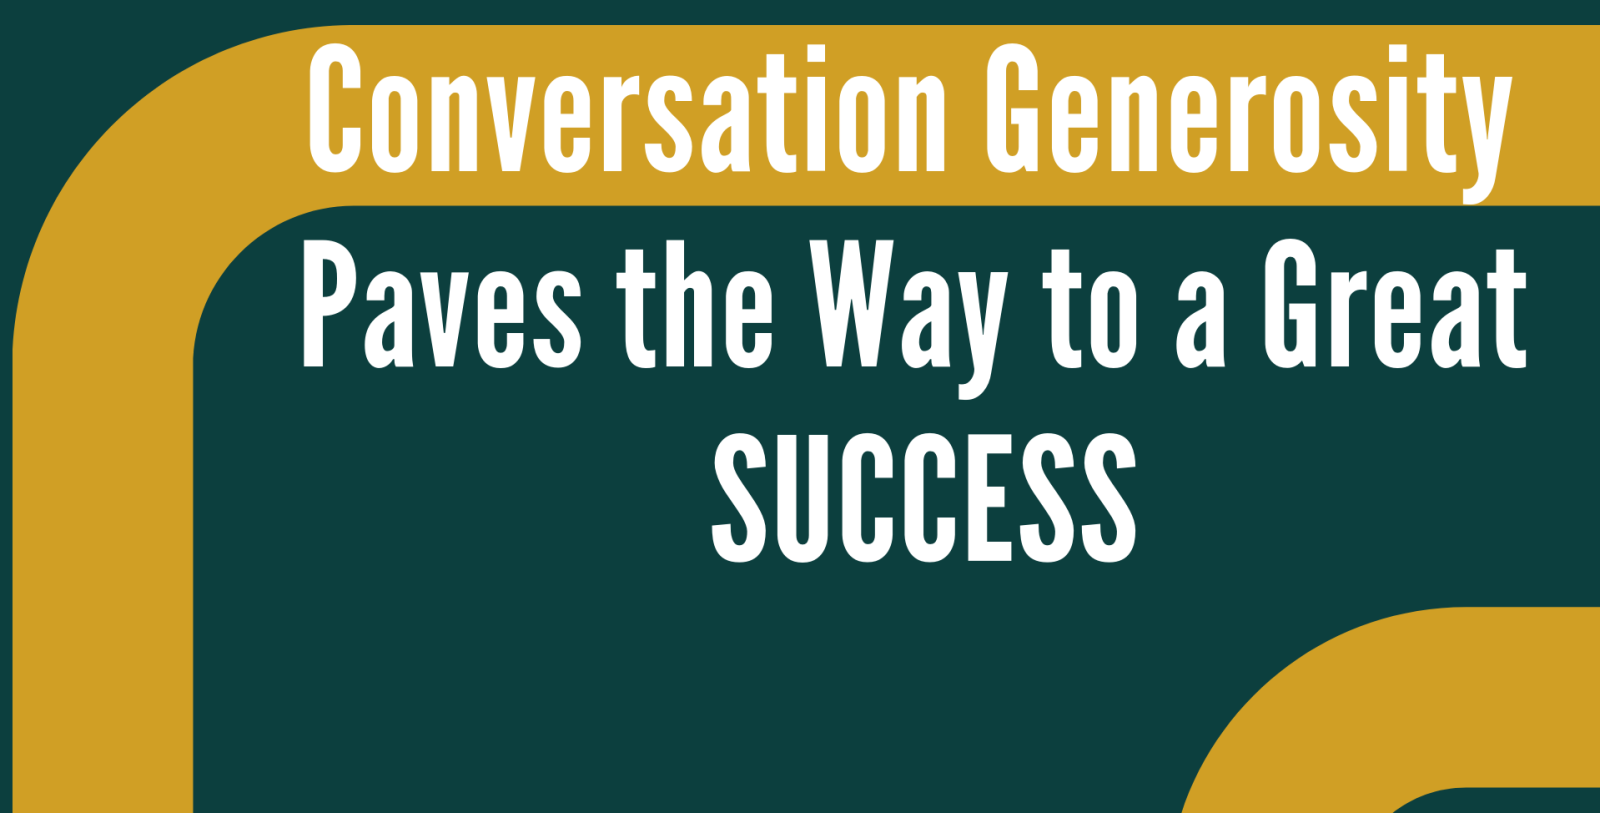 Conversation Generosity Paves the Way to a Great SUCCESS